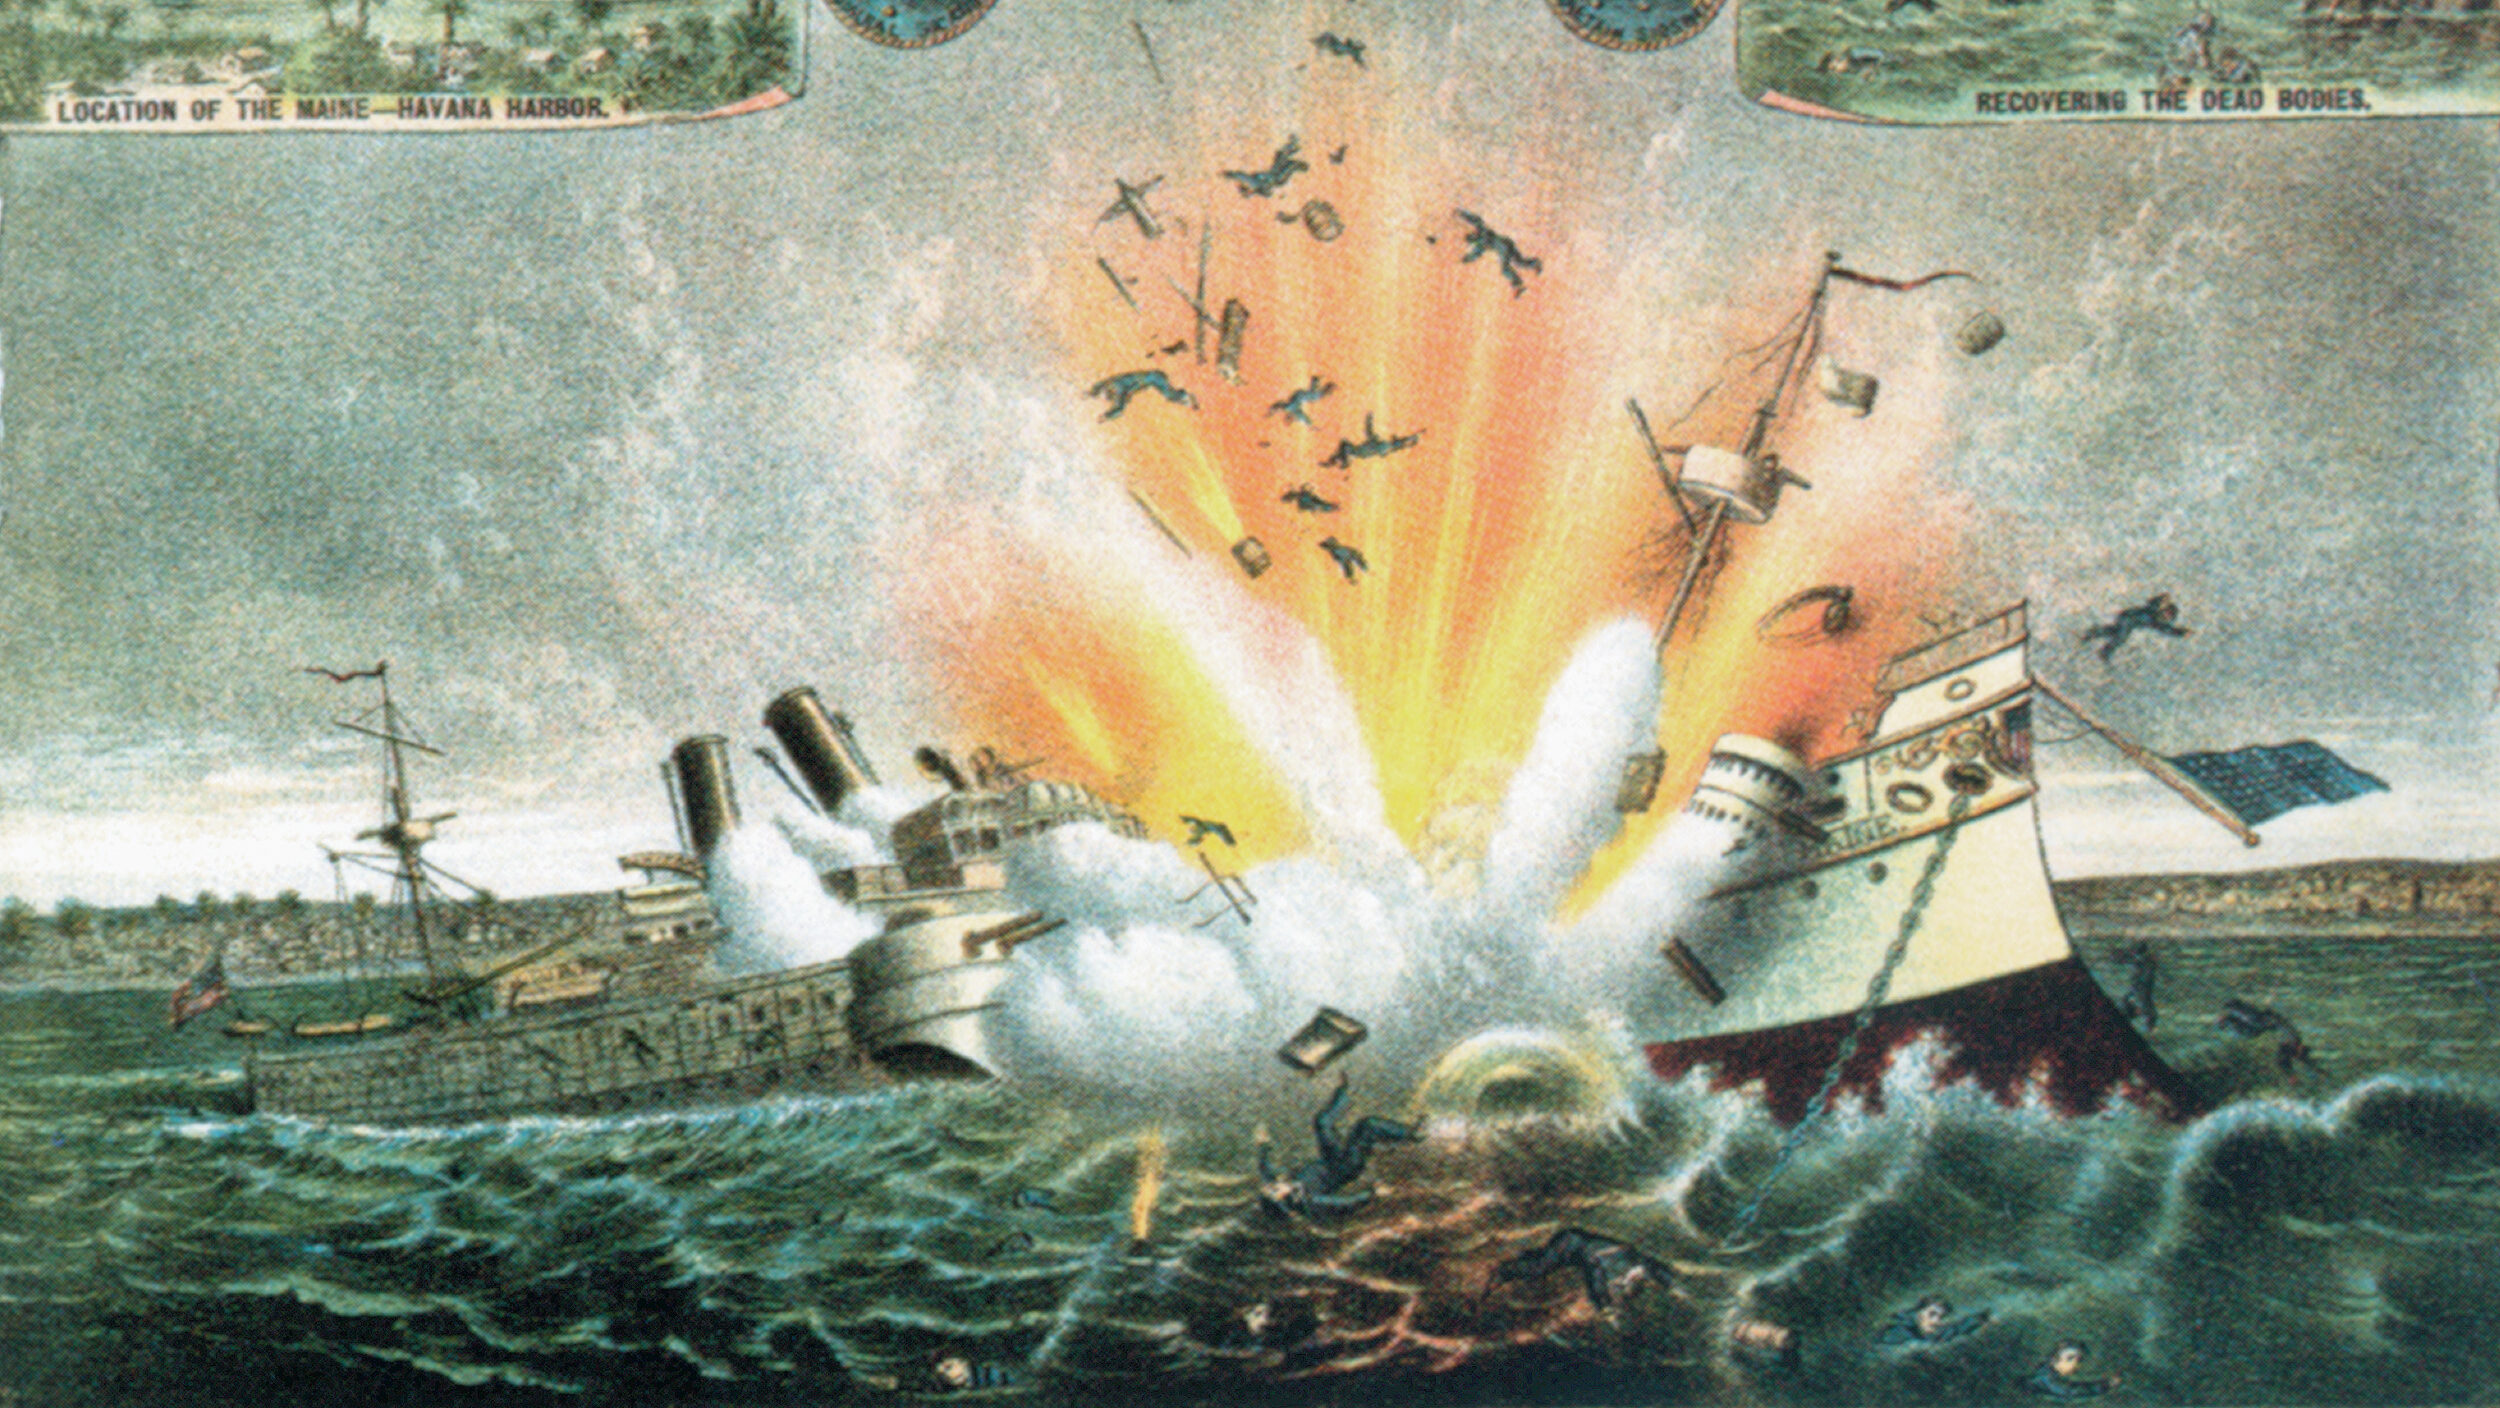 Created solely from the artist’s imagination, this chromolithograph was issued to meet the Ameri- can public’s demand for revenge against Spain for the destruction of the USS Maine.